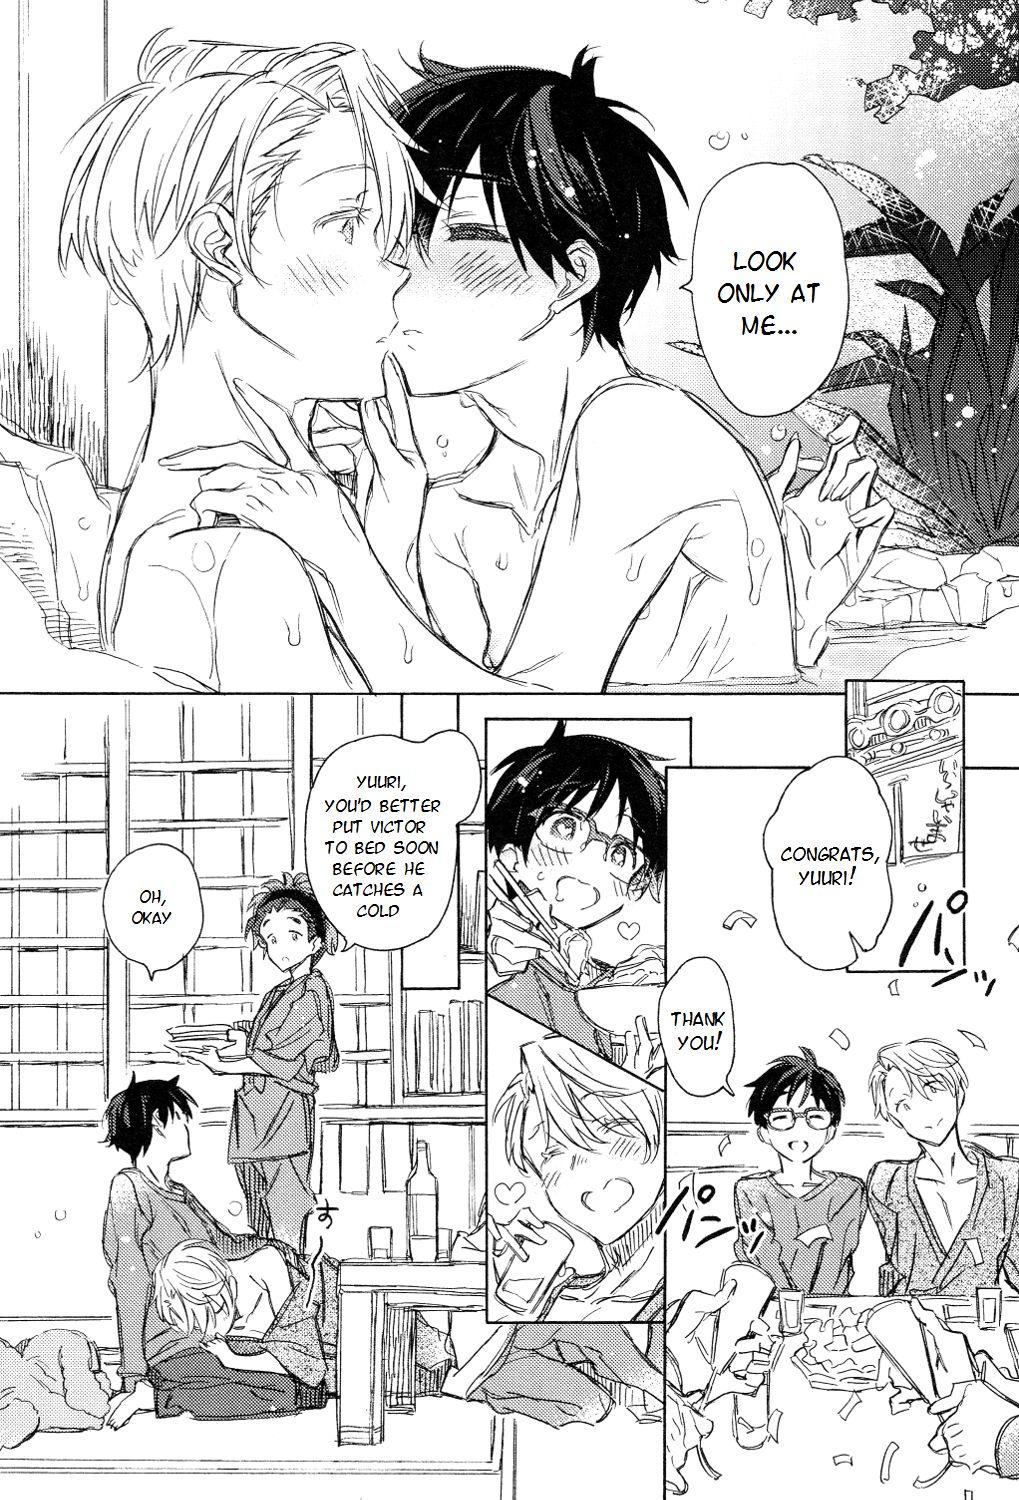 Trans BRAND NEW DAY,BRAND NEW LIFE - Yuri on ice Banho - Page 6